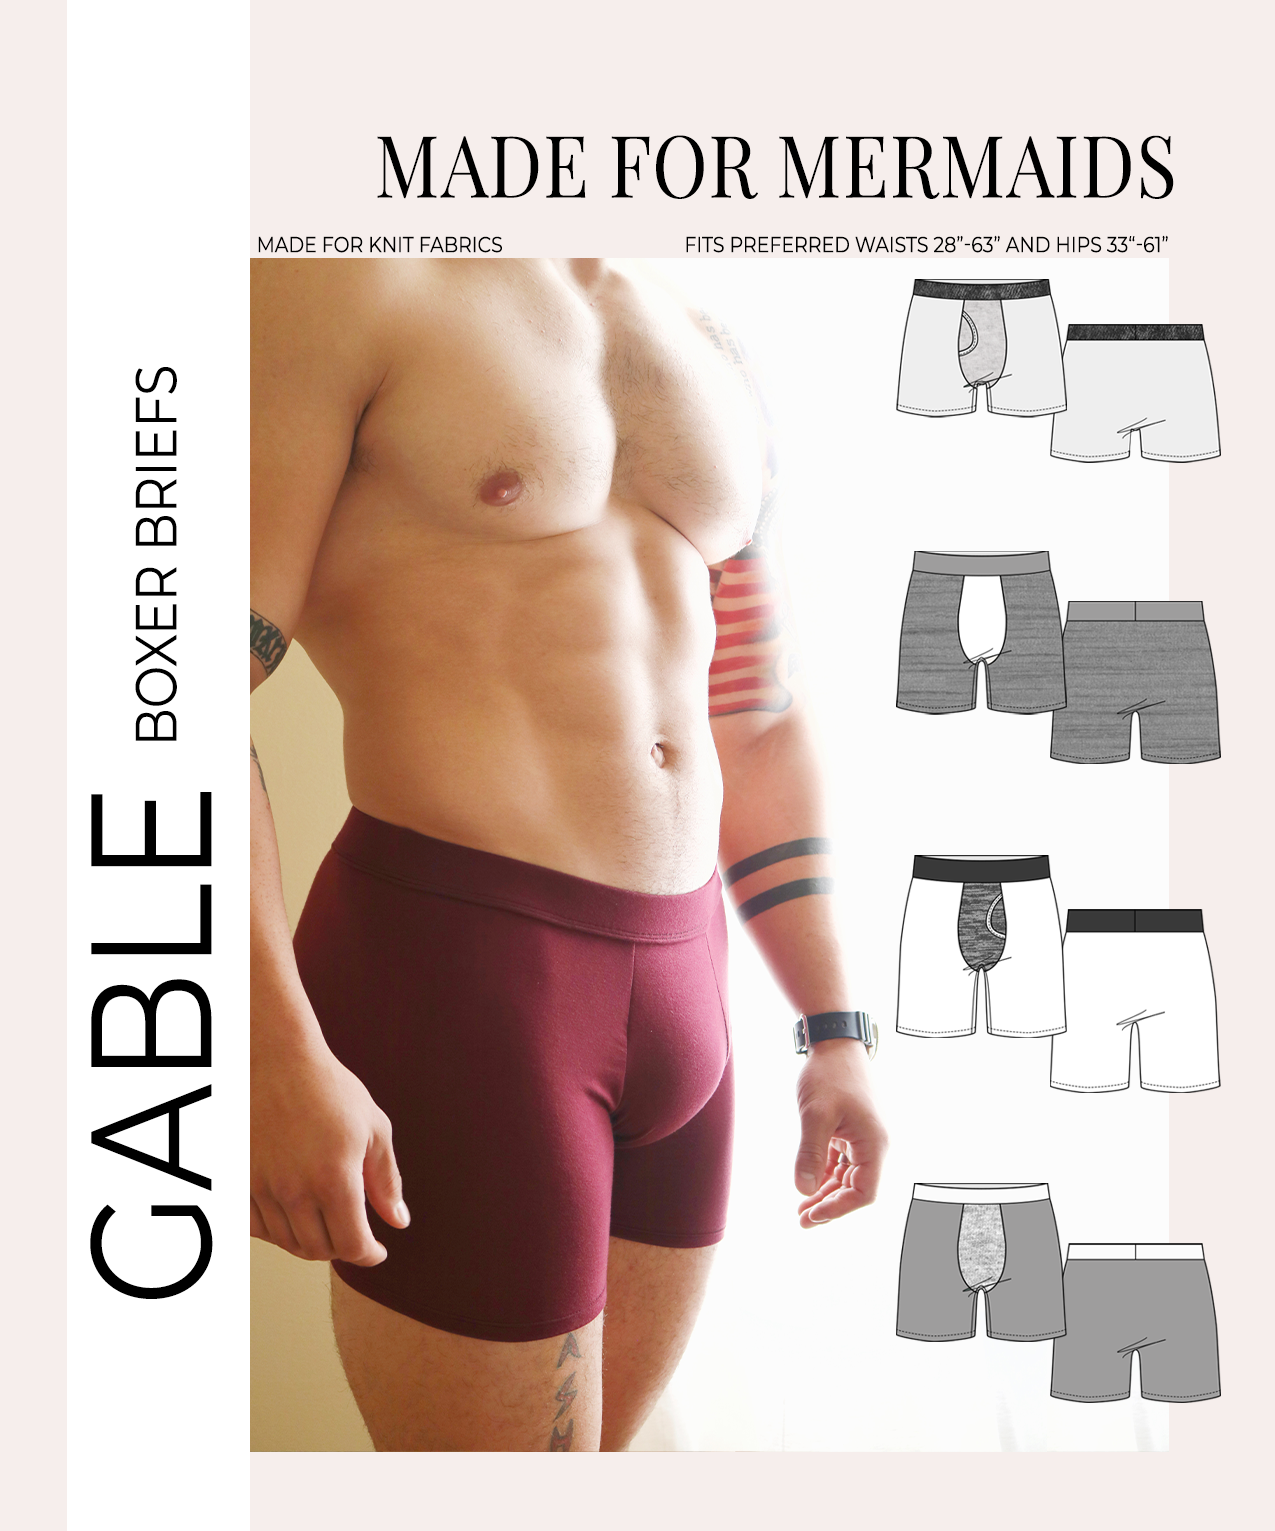 Tips On The Most Comfortable Men's Underwear - Lingerie Briefs